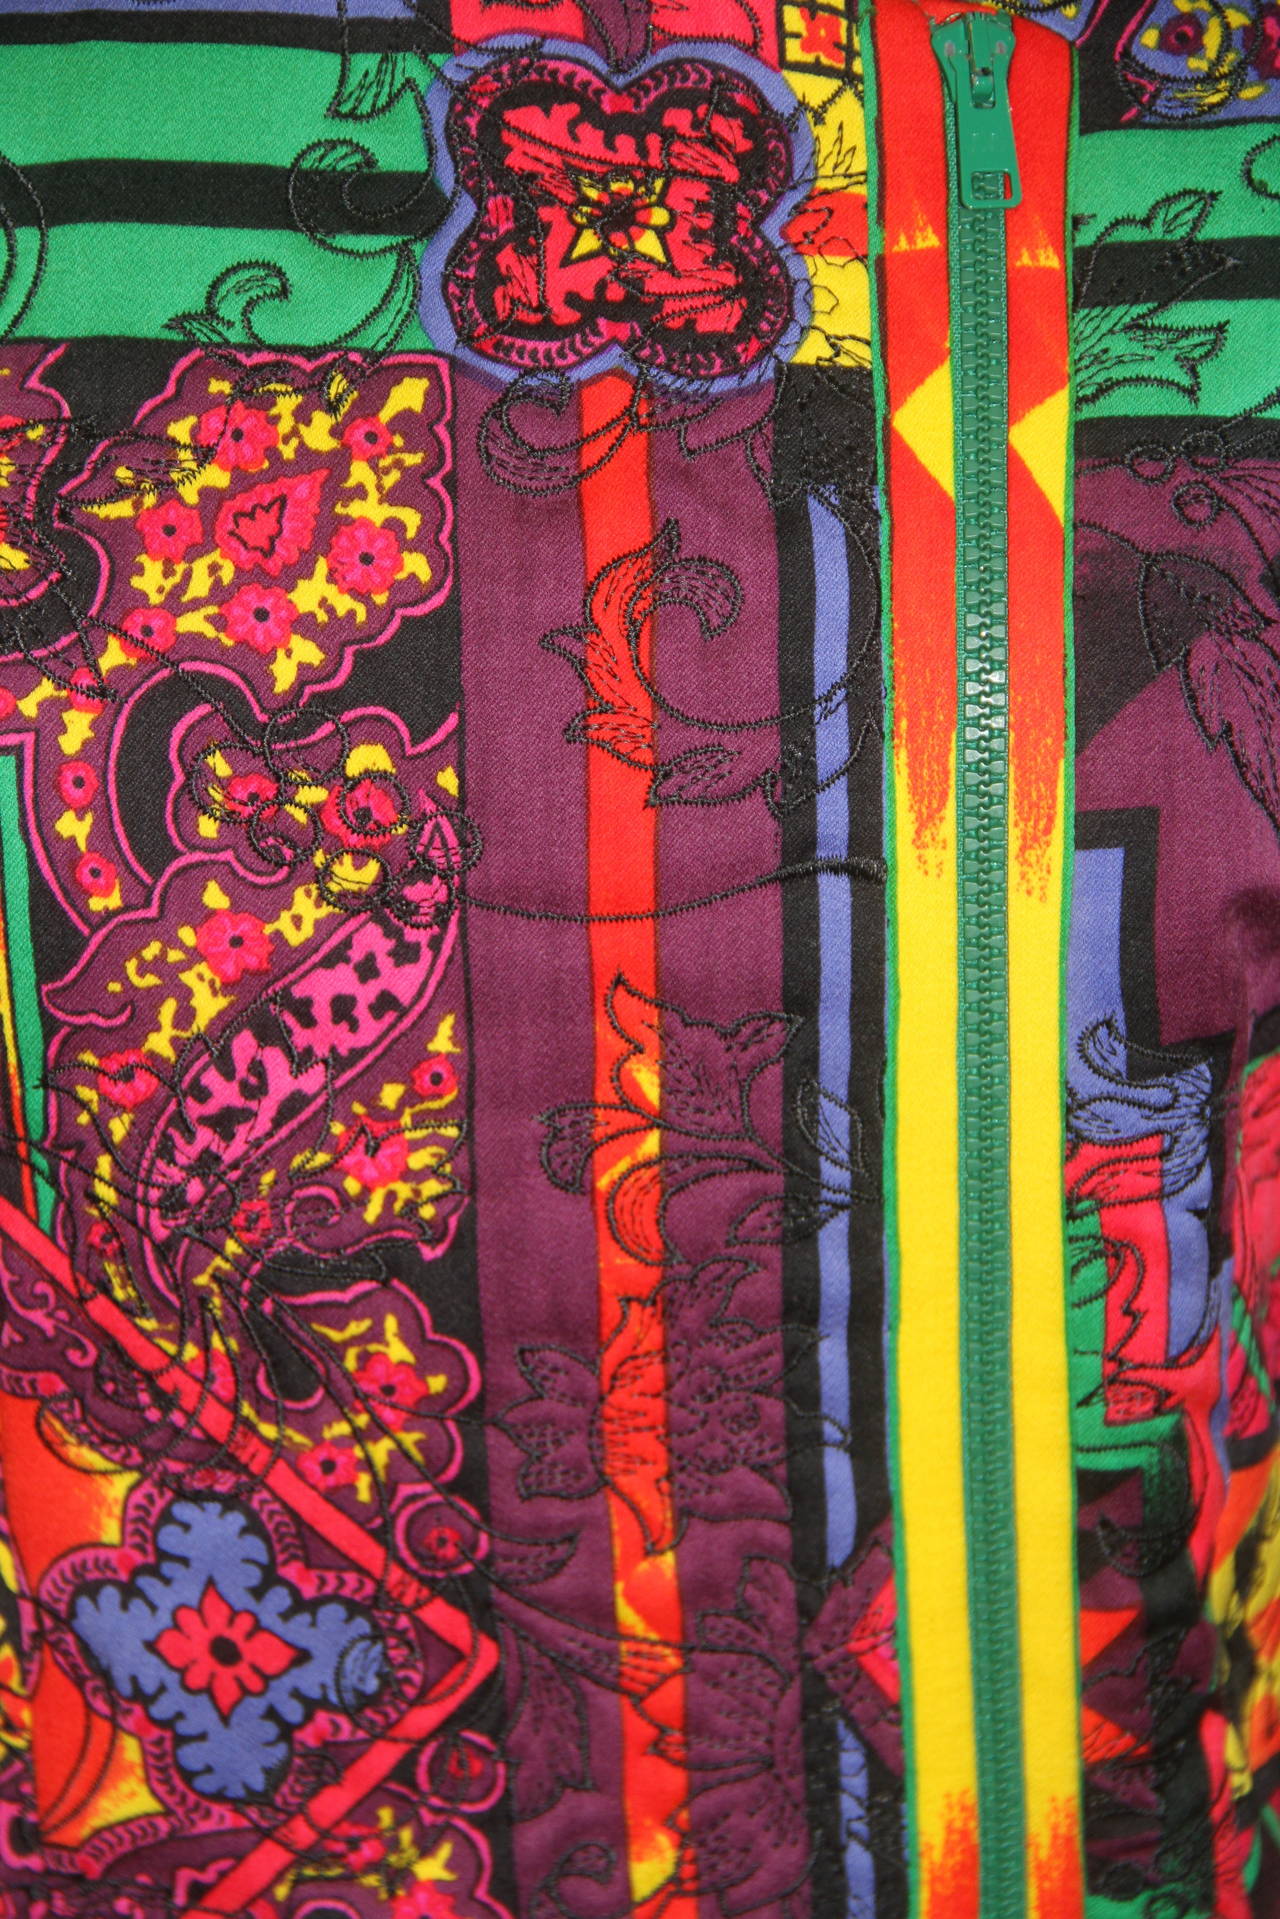 Gianni Versace multi-coloured printed zip front suit from the Fall 1991 collection.

Marked an Italian size 42.

Manufacturer - Alias S.p.a.

Fabric content - 100% wool